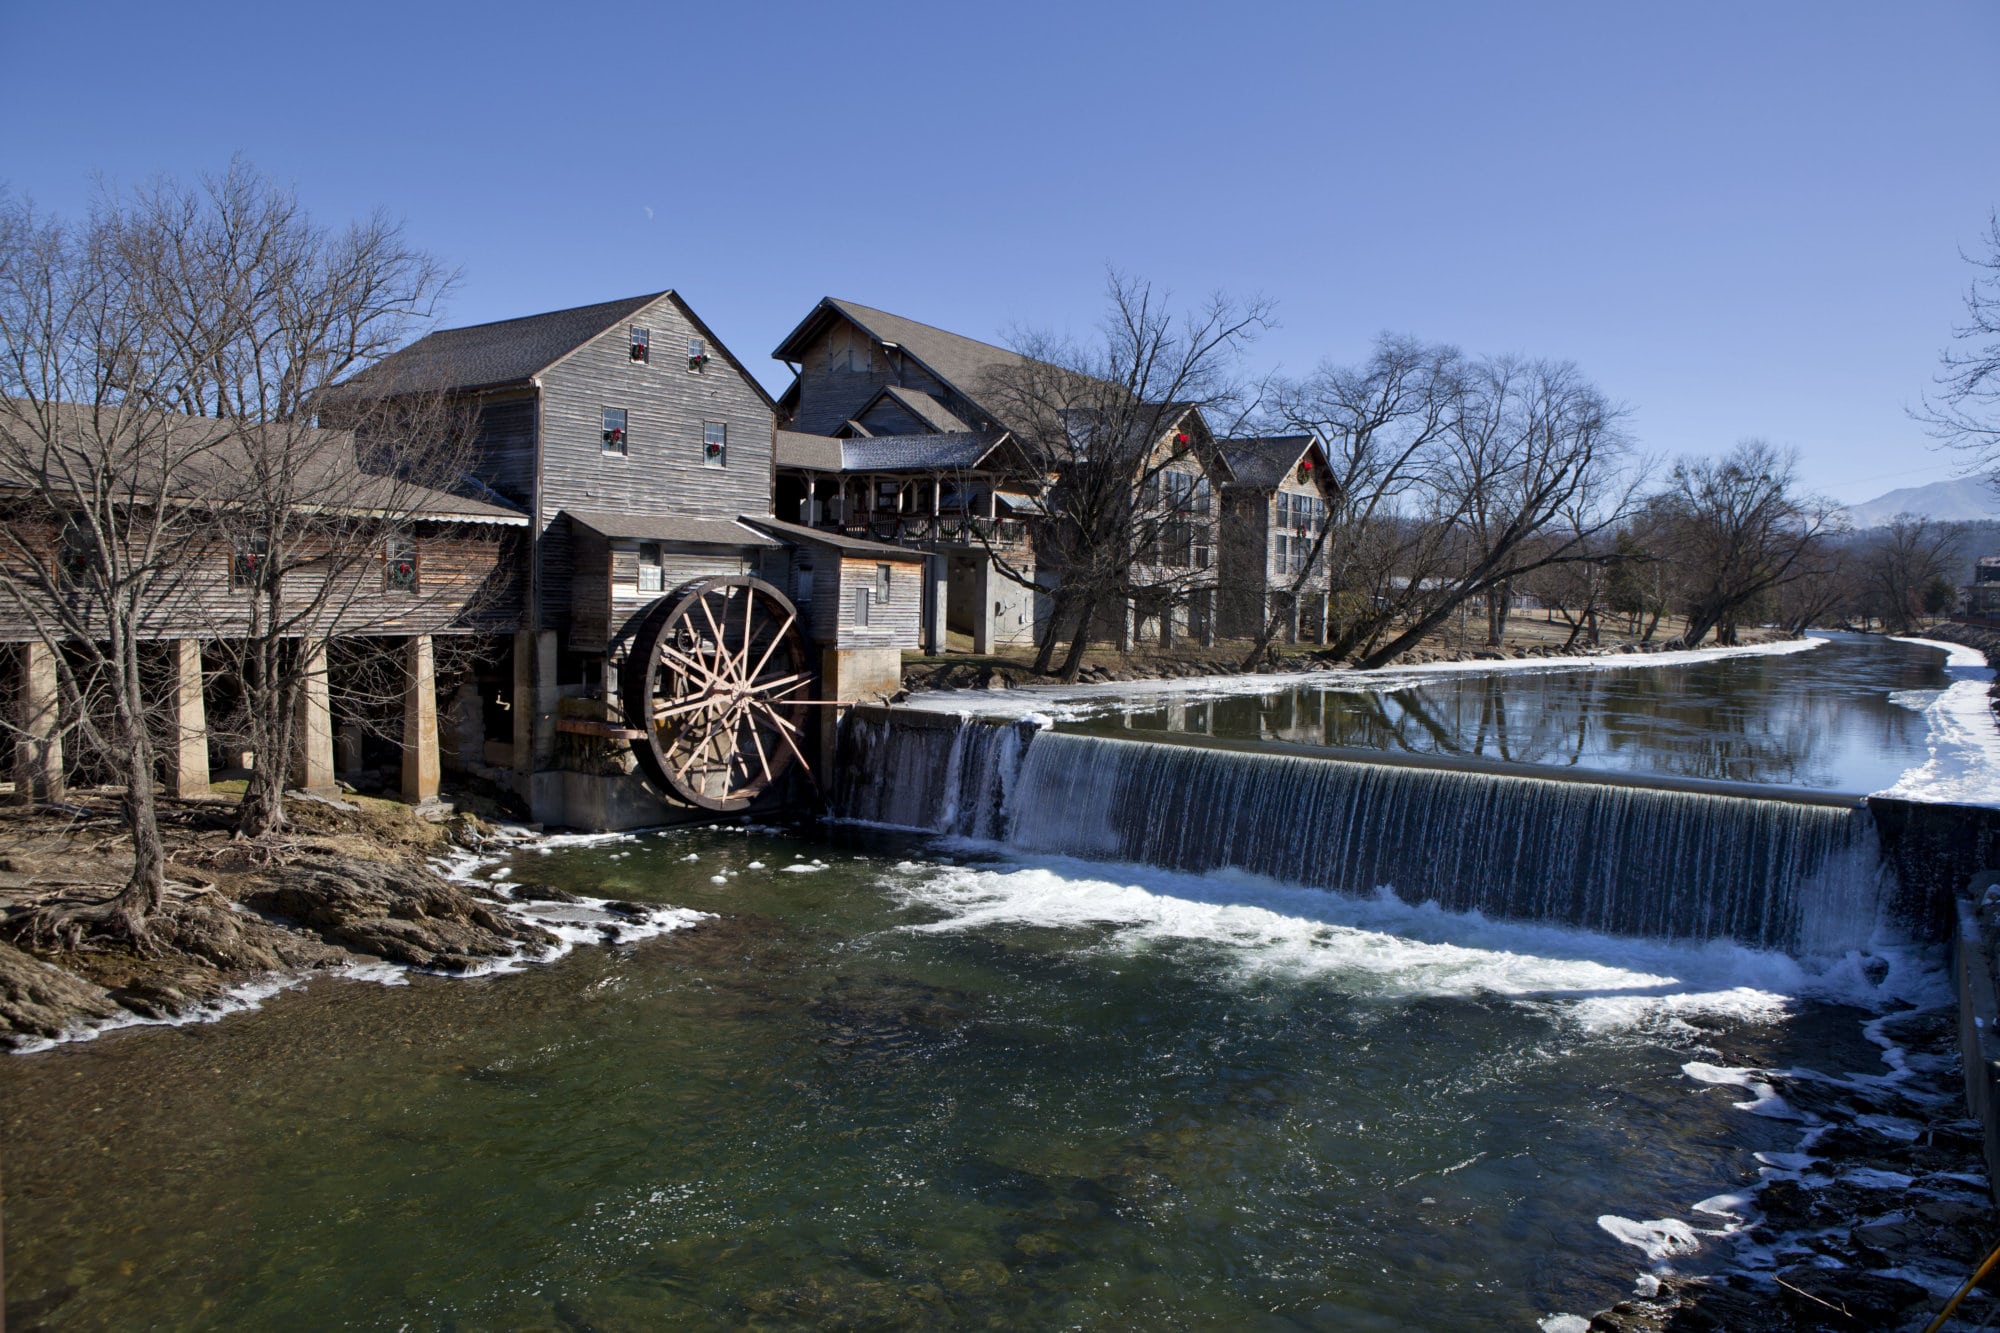 Watermill on the Little Pigeon river, in the mountain community of Pigeon Forge, Tennessee during the winter. Ice can be seen along the banks of the river